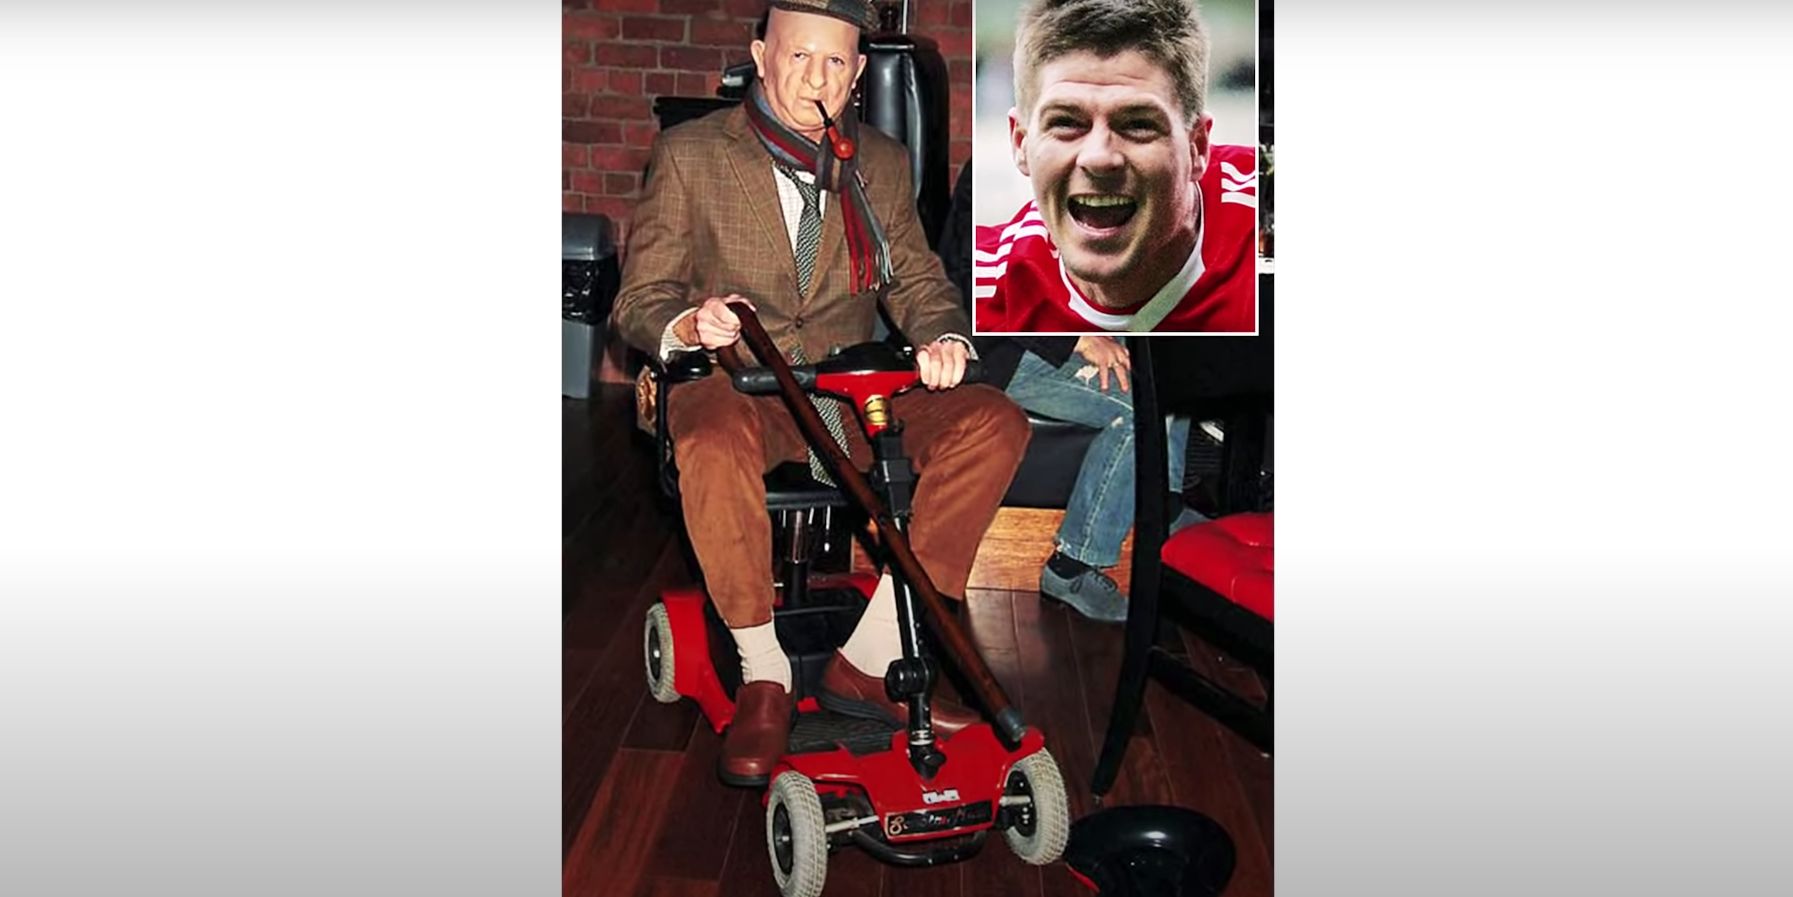 (Video) Steven Gerrard on his famous old man fancy dress costume for the Liverpool Christmas party